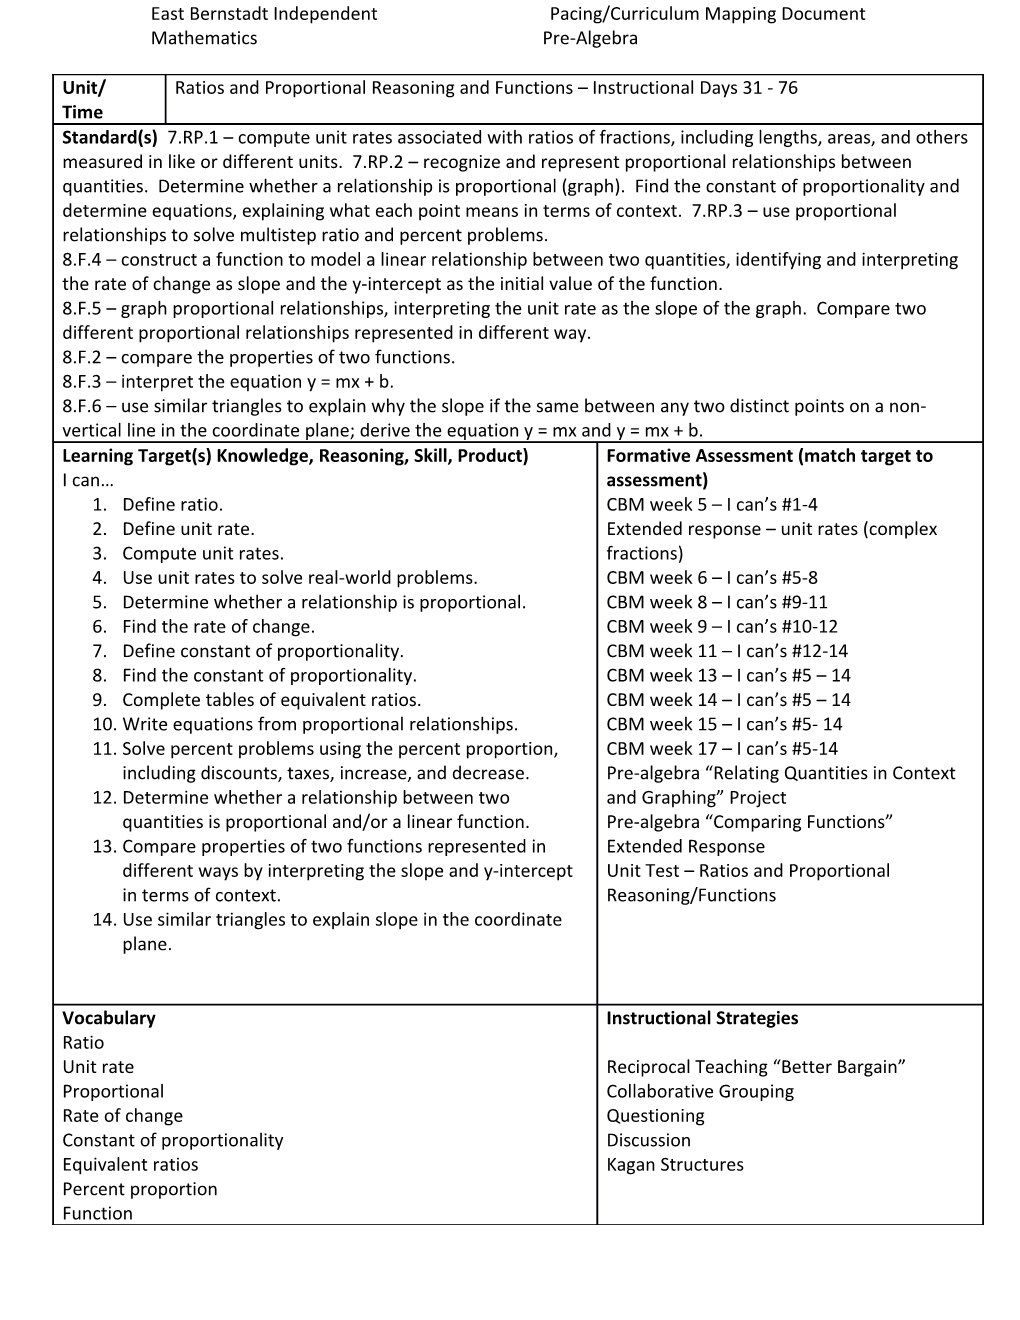 East Bernstadt Independent Pacing/Curriculum Mapping Document